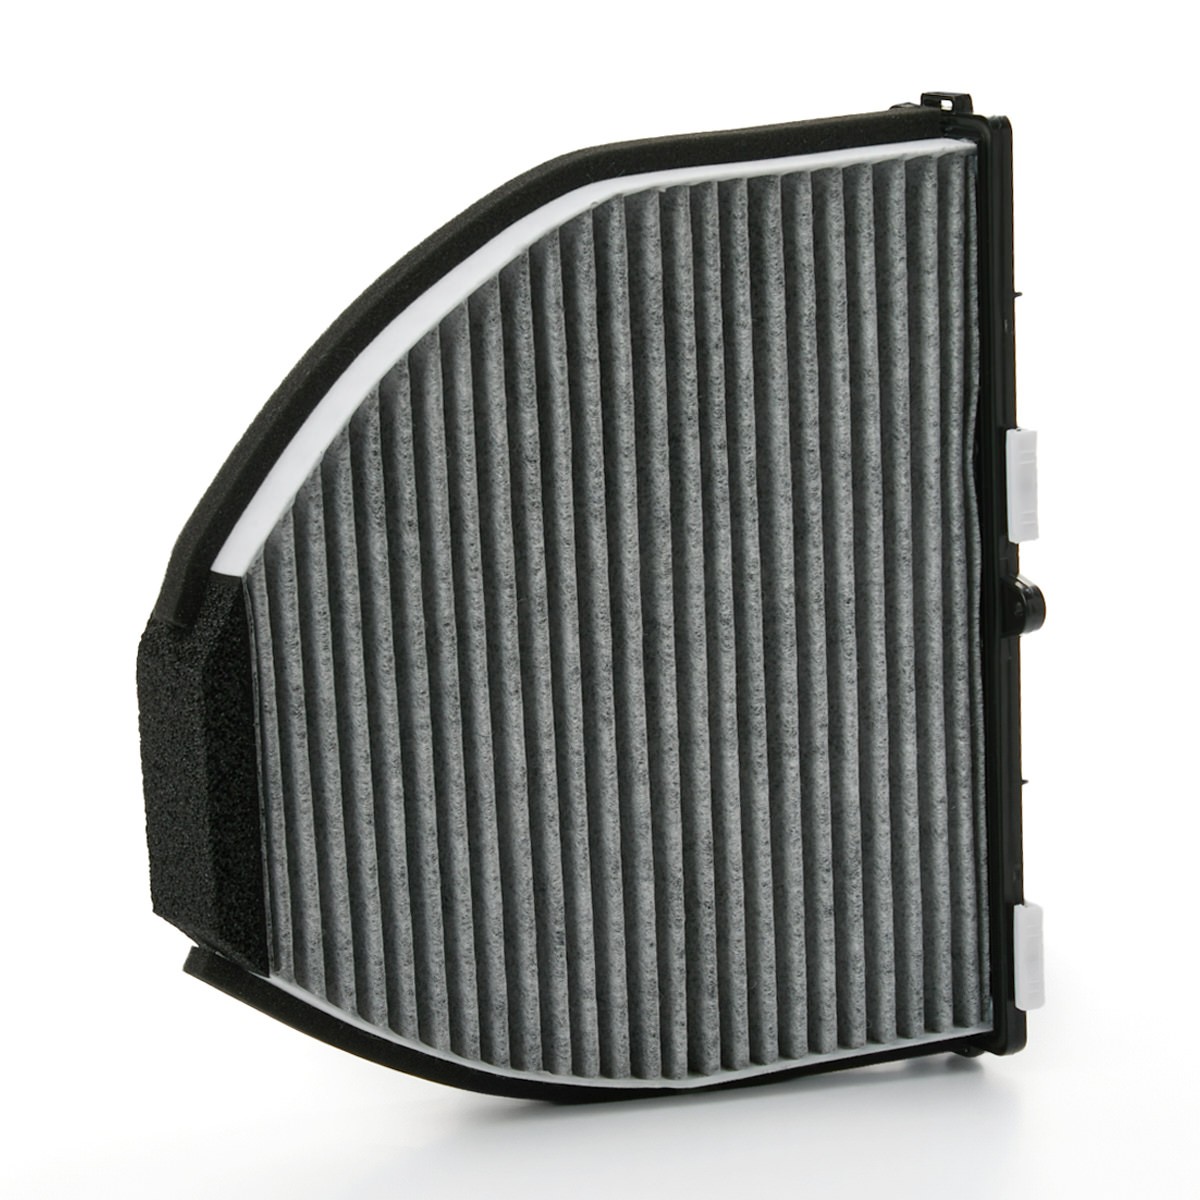 BLUE PRINT Activated Carbon Filter, 257 mm x 275 mm x 85 mm Width: 275mm, Height: 85mm, Length: 257mm Cabin filter ADU172501 buy